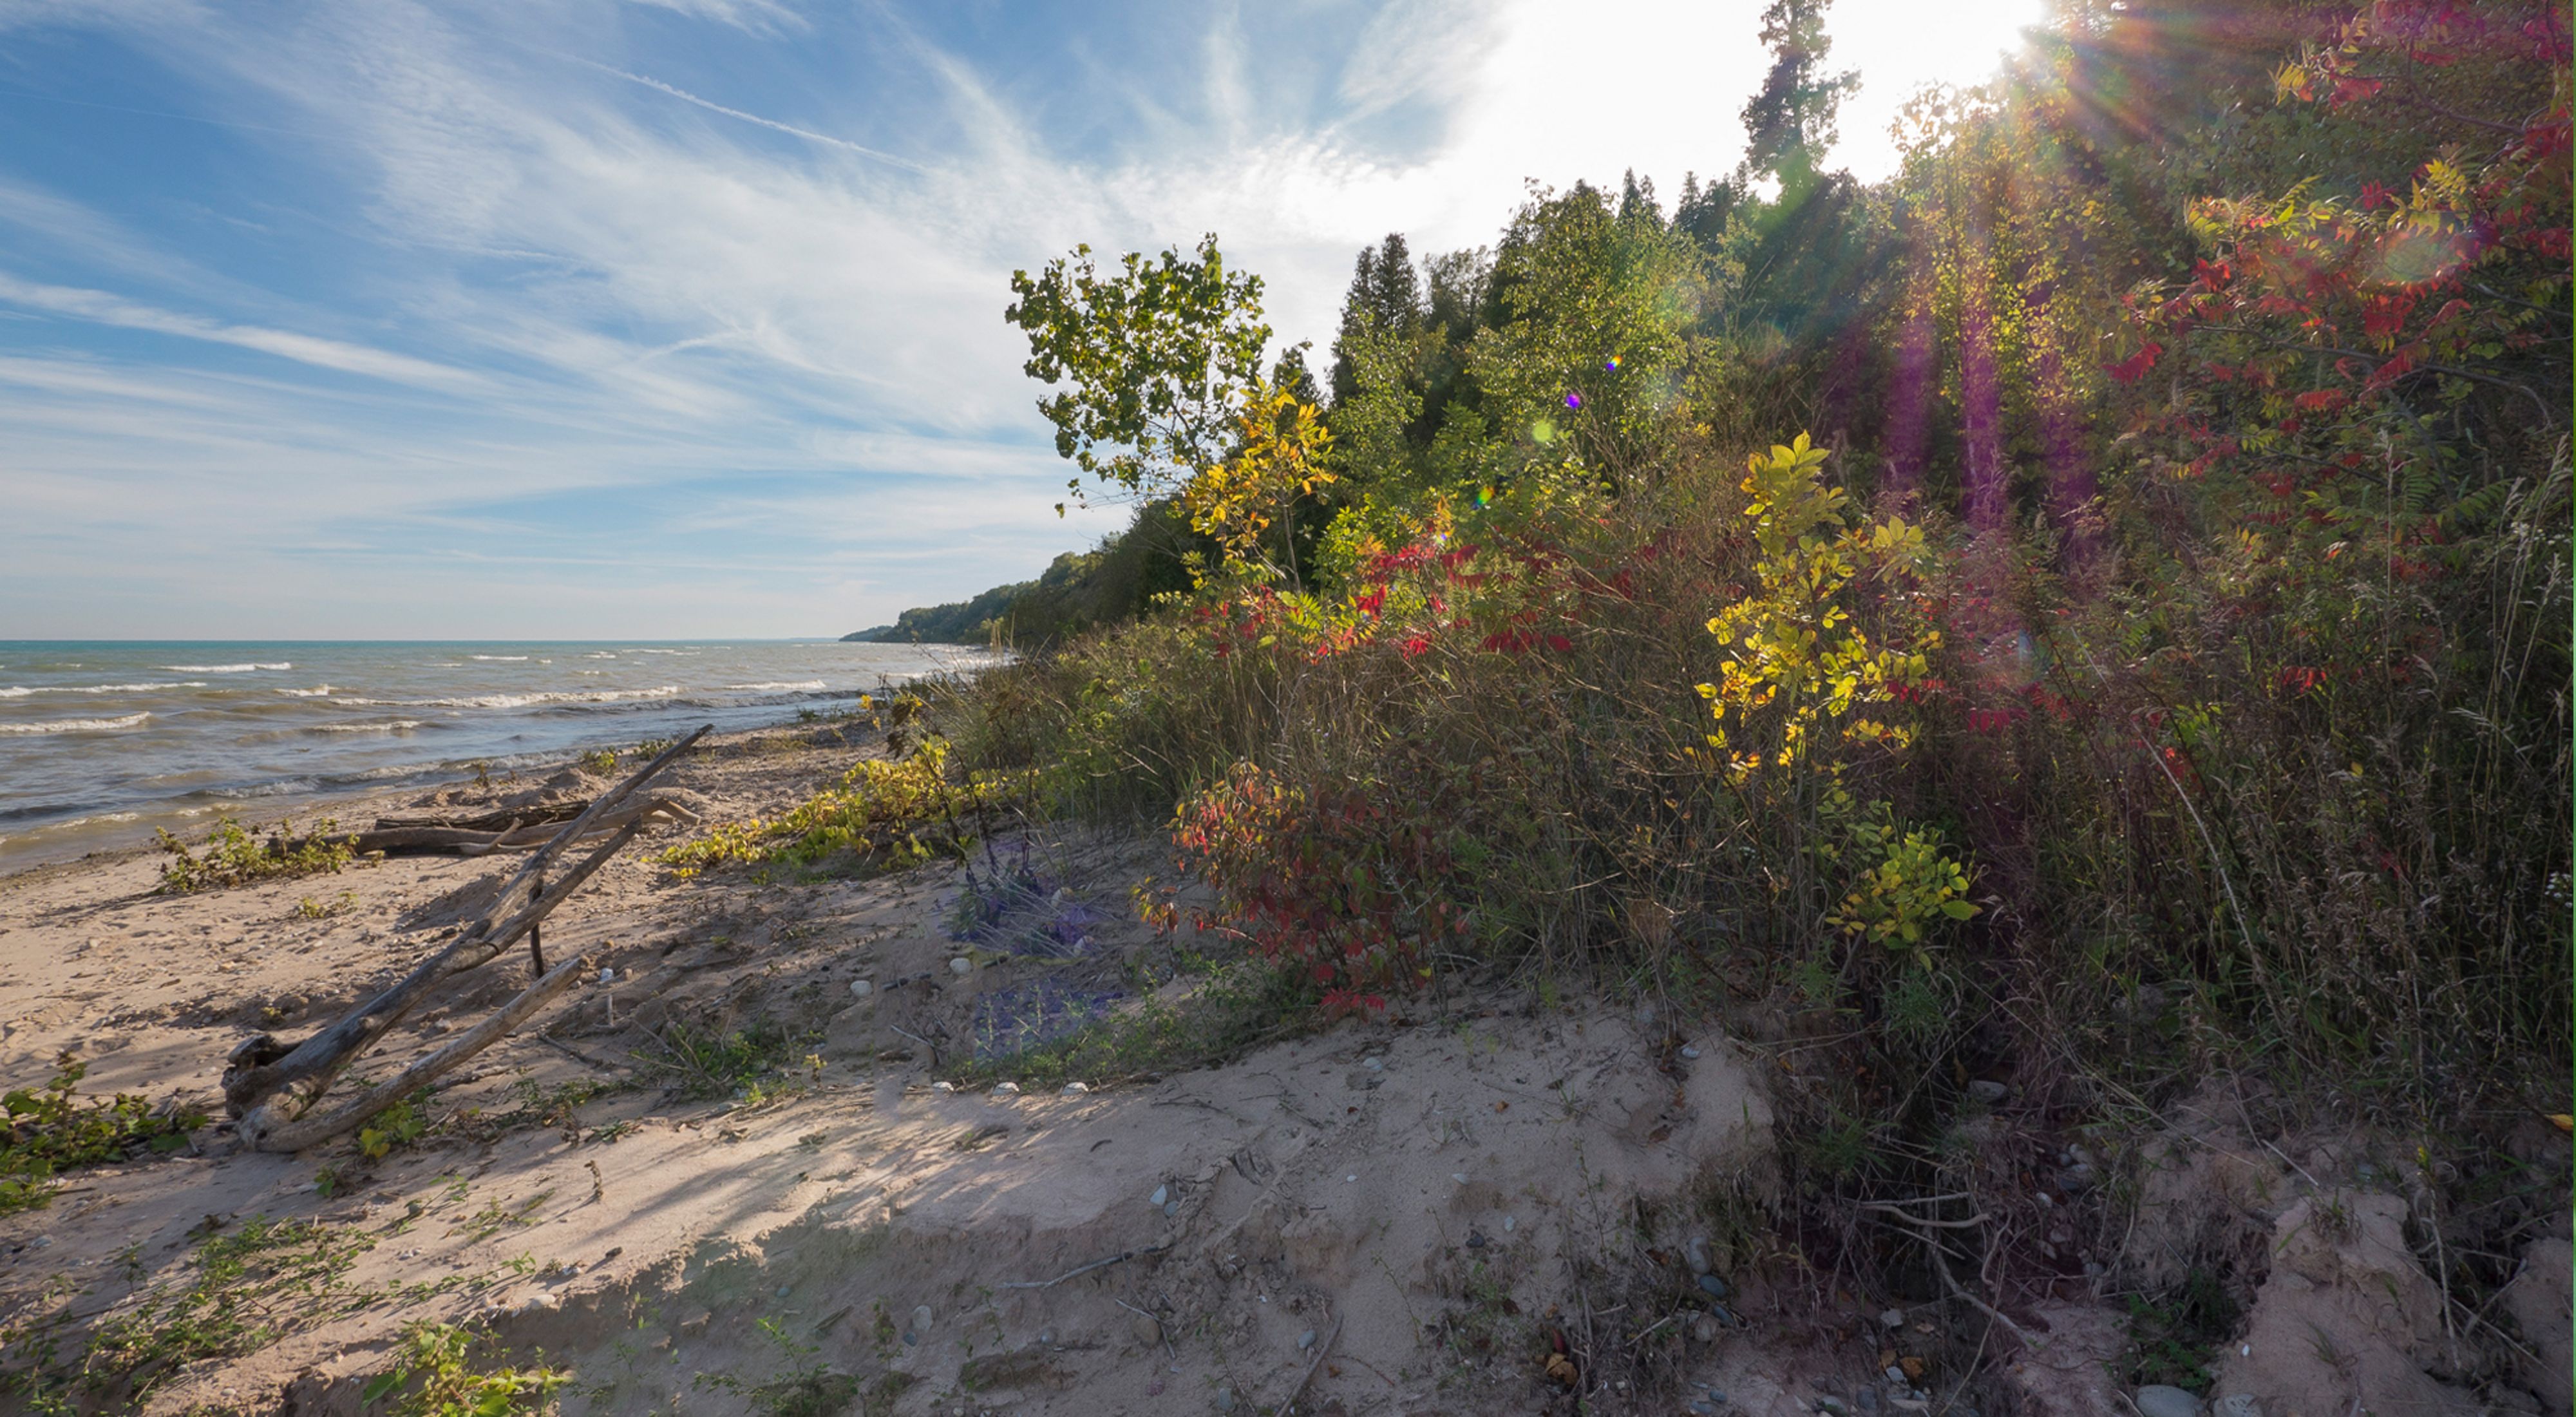 A sunbeam breaks through the clouds in a blue sky highlighting the vegetation along the sandy shore of Lake Michigan.